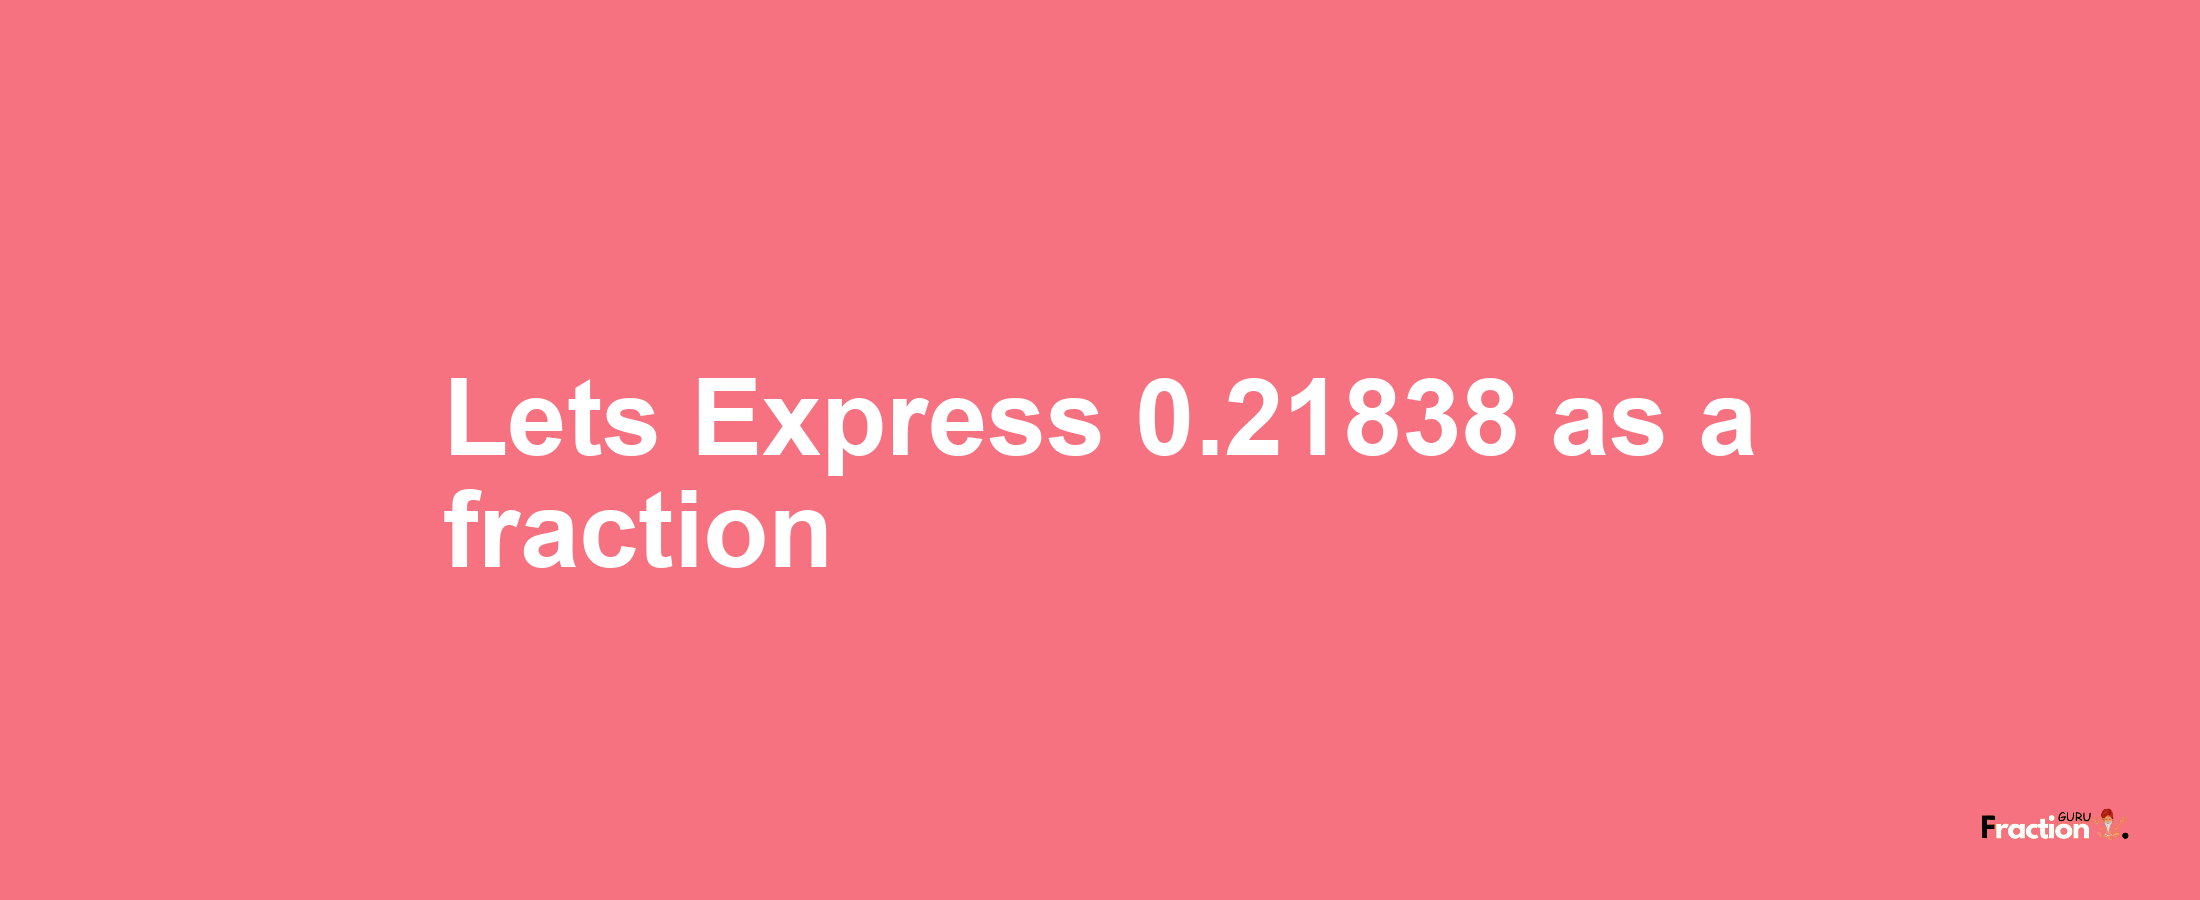 Lets Express 0.21838 as afraction